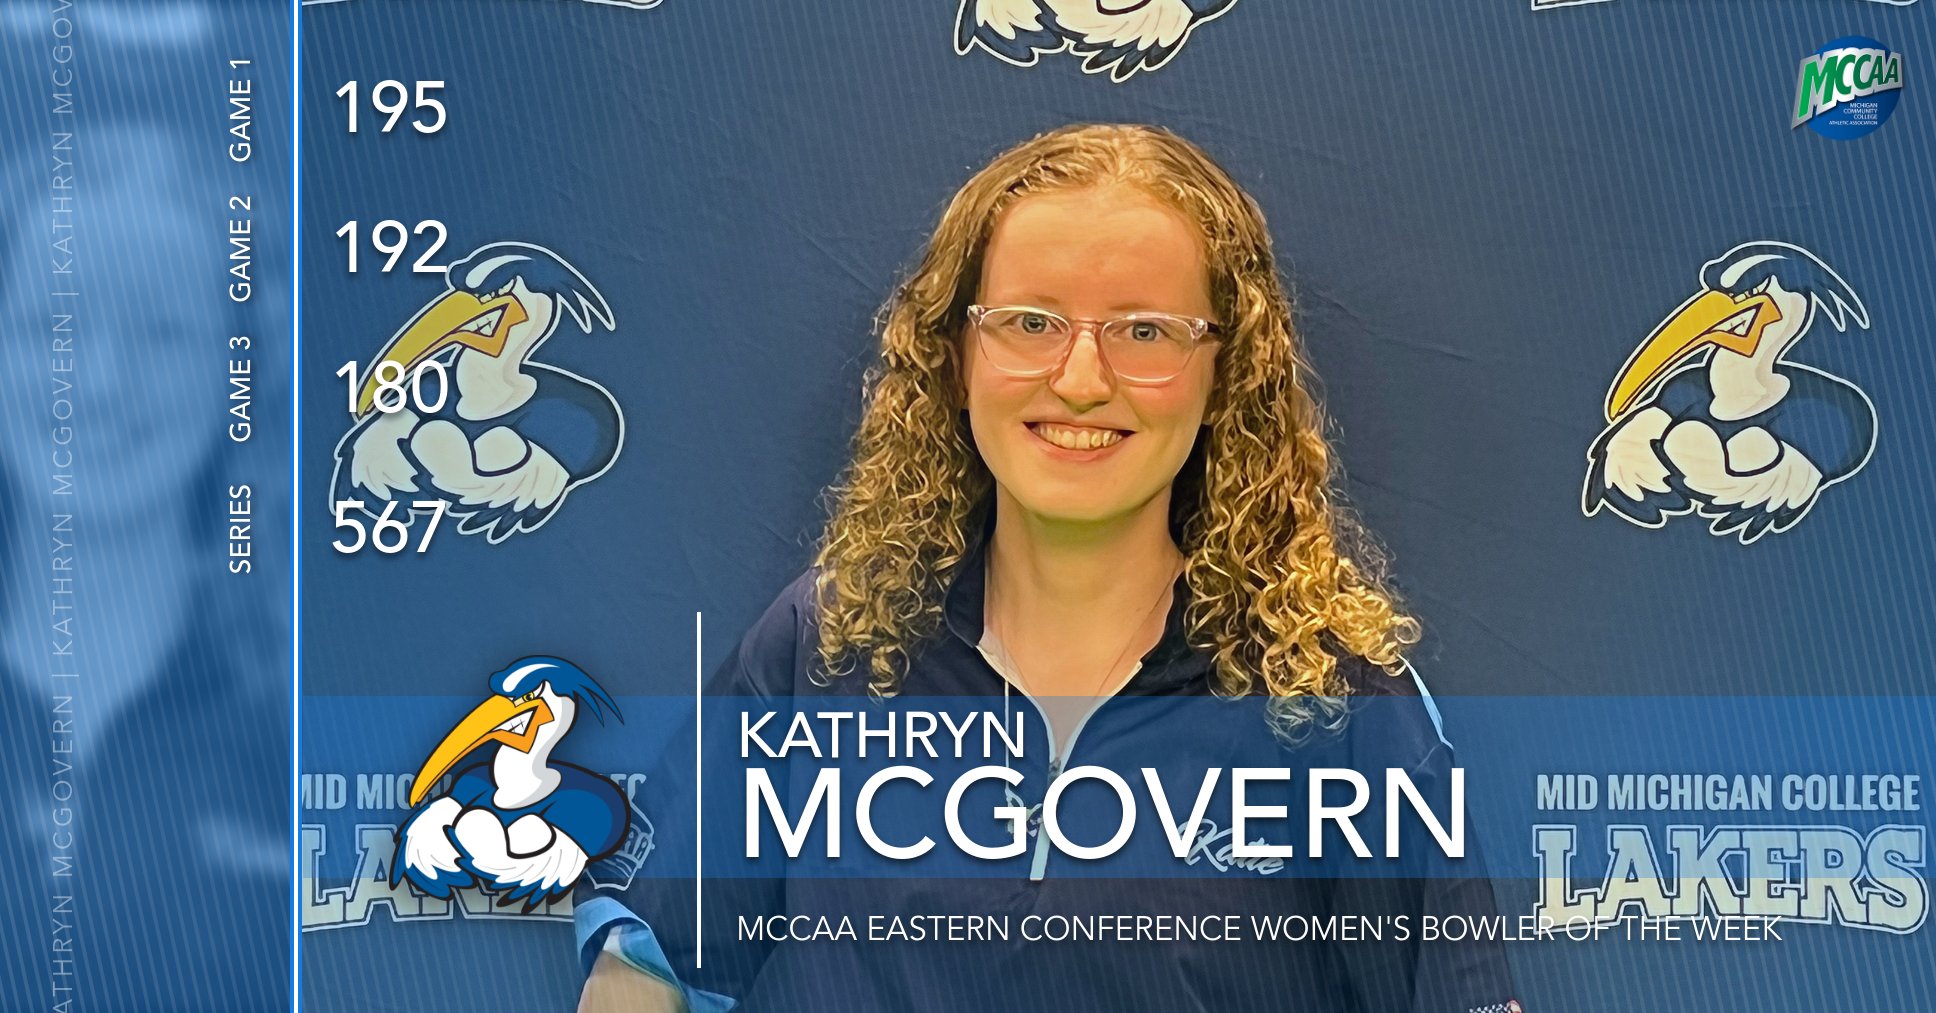 Kathryn McGovern, MCCAA Eastern Conference Women's Bowler of the Week, Mid Michigan College